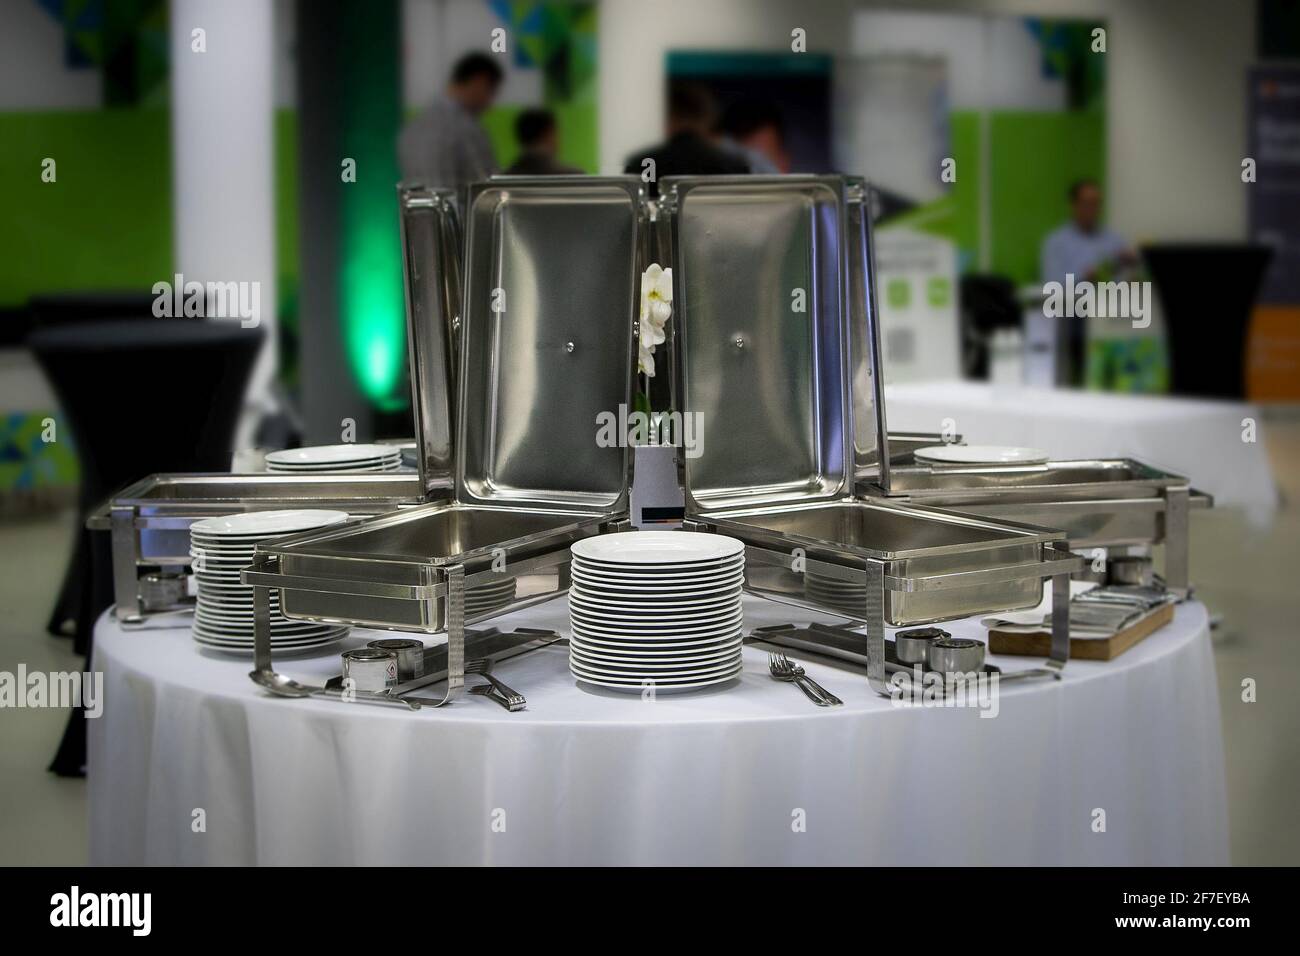 https://c8.alamy.com/comp/2F7EYBA/aluminium-or-stainless-steel-containers-for-food-on-a-conference-or-a-banquet-on-a-white-table-a-bunch-of-white-plates-and-cutlery-is-seen-2F7EYBA.jpg